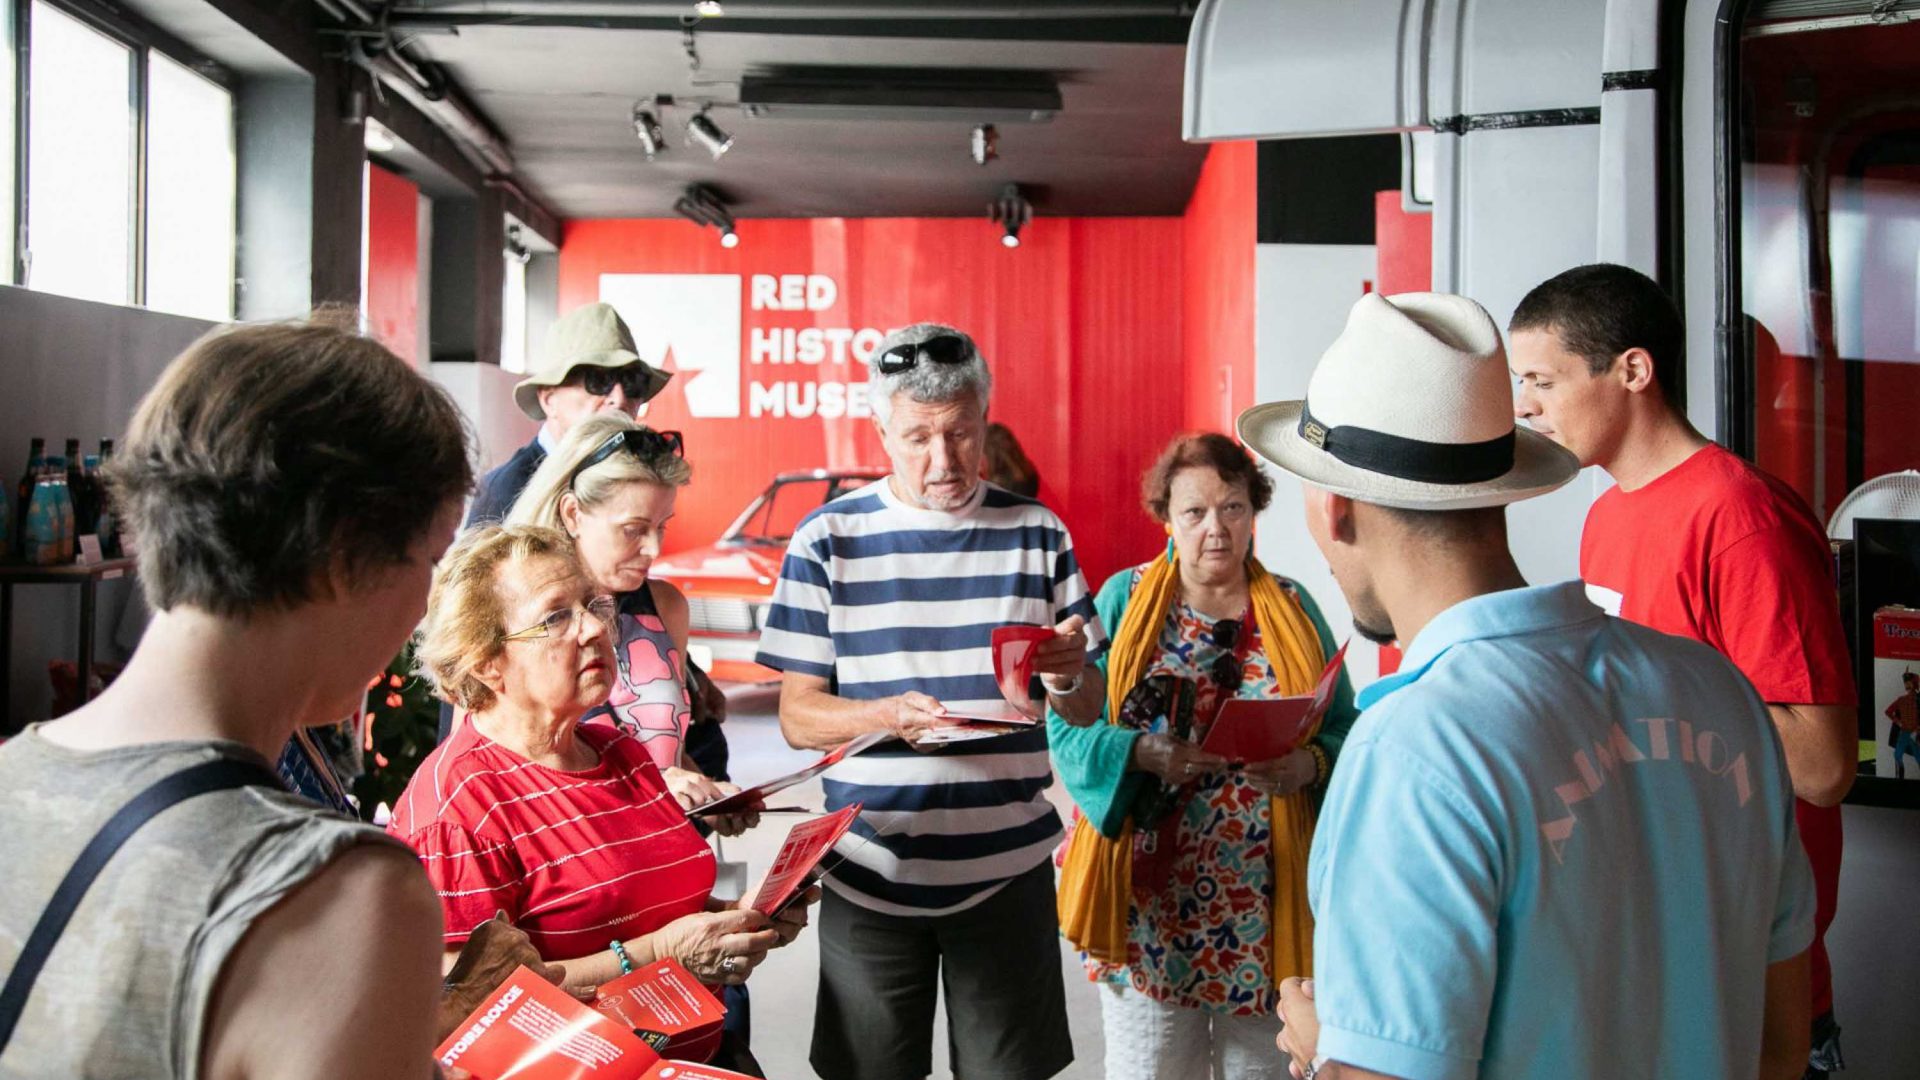 A group of visitors inside the Red History Museum.